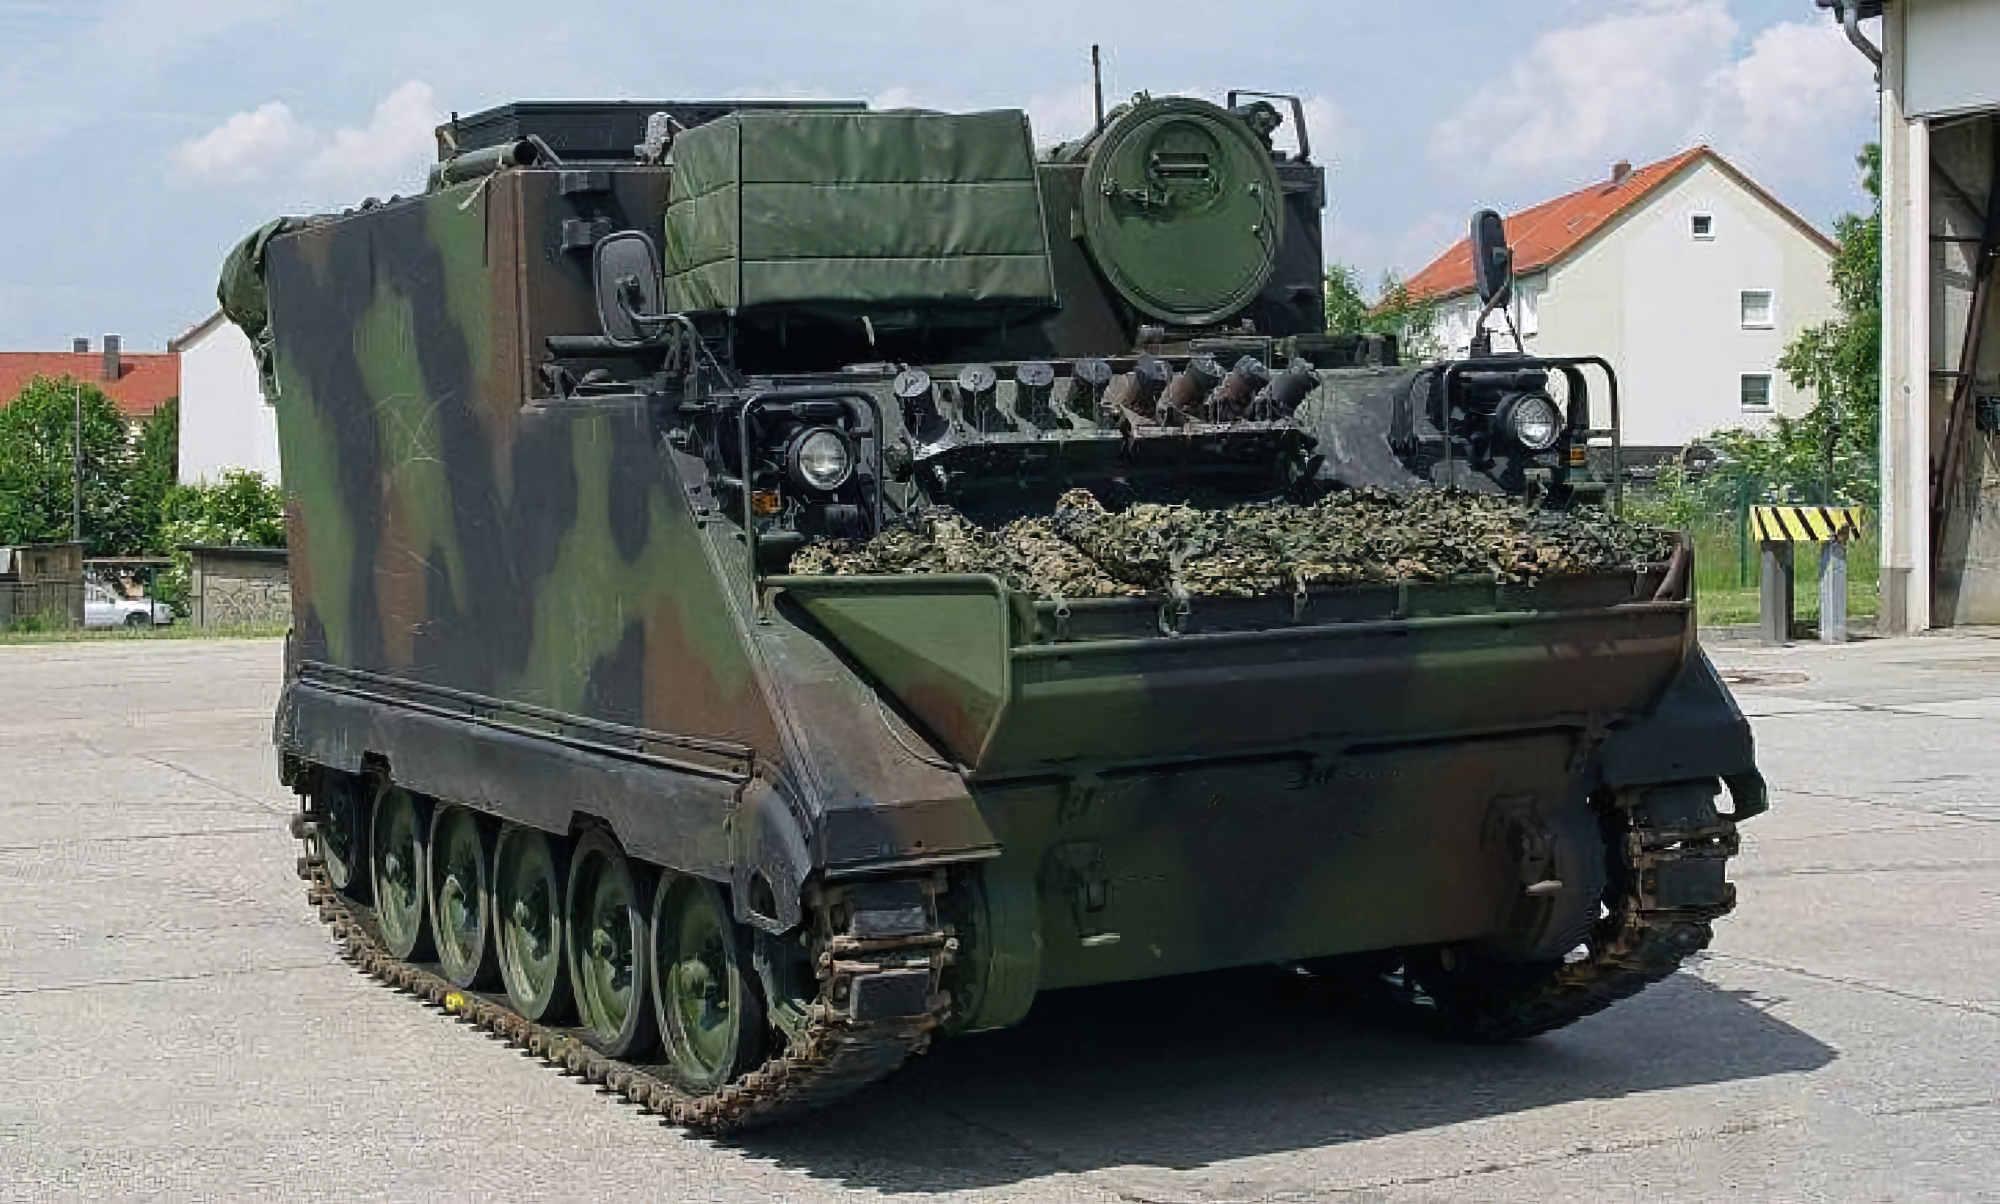 The AFU received a new batch of M577 command and staff vehicles based on M113 armoured personnel carriers from Lithuania